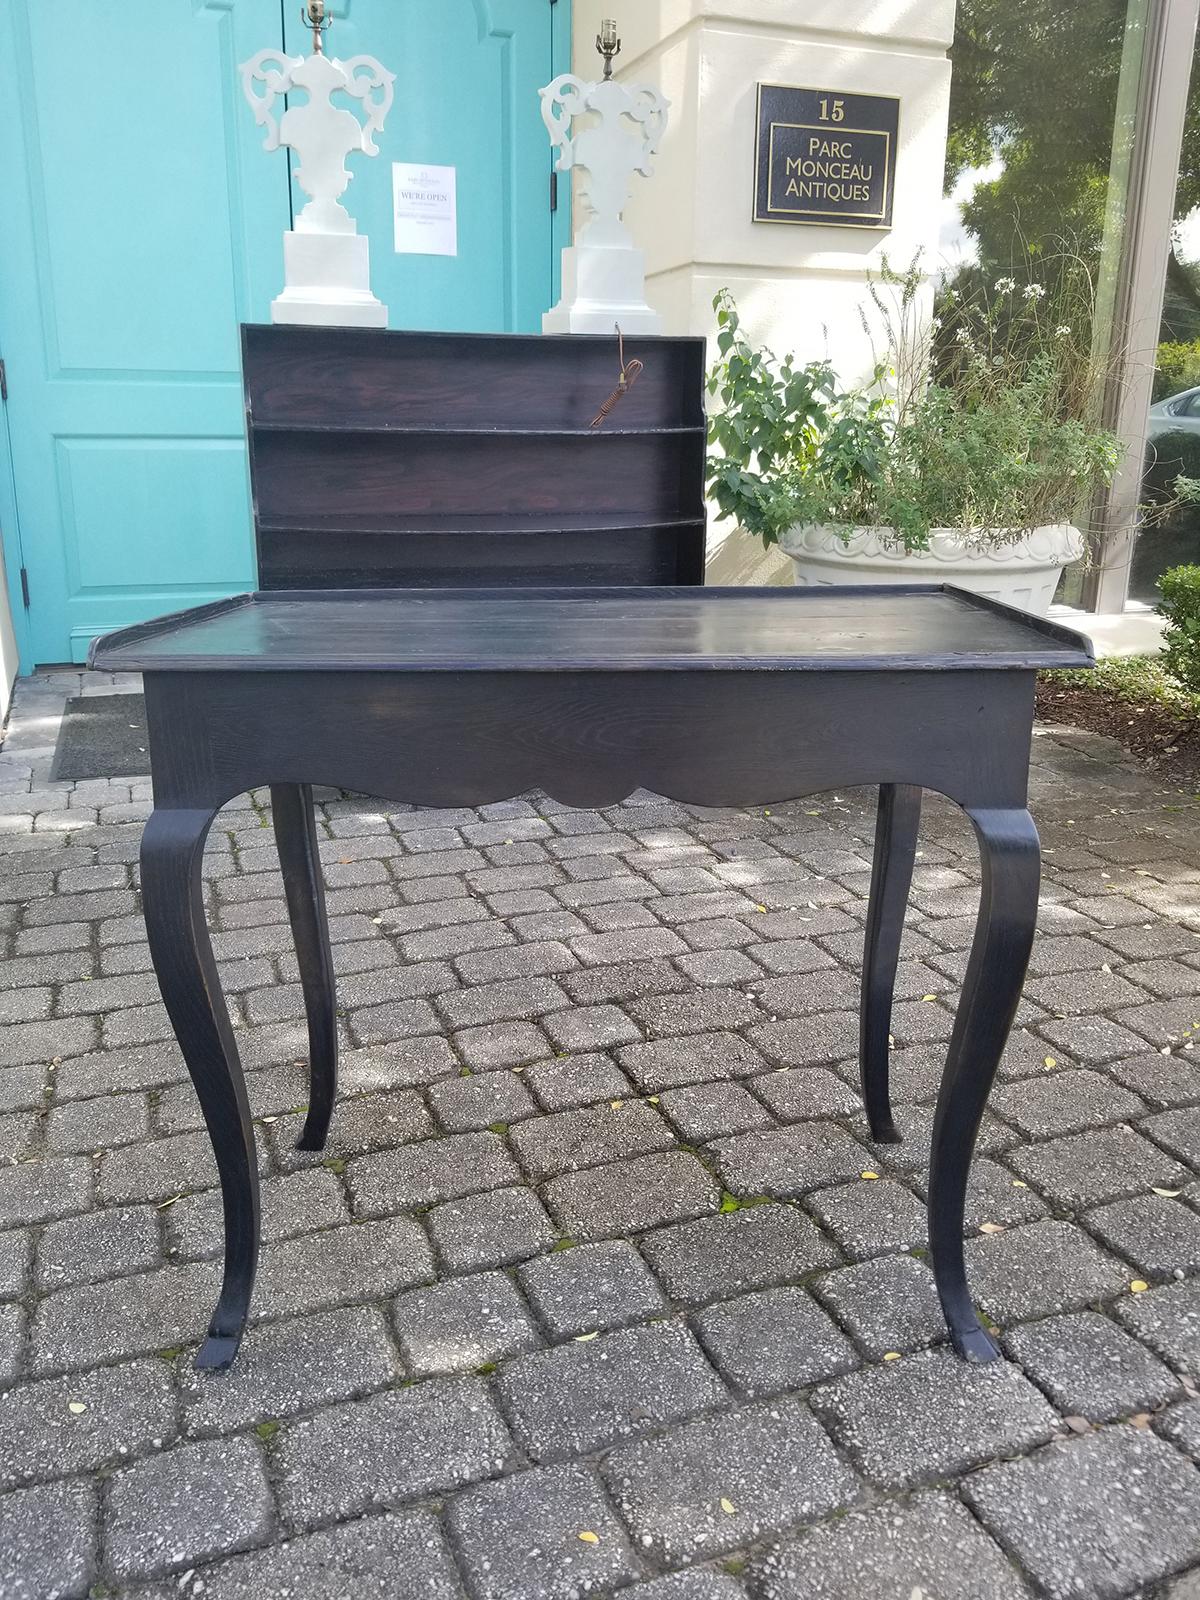 18th/19th century French Louis XV style oak ebonized side table with drawer.